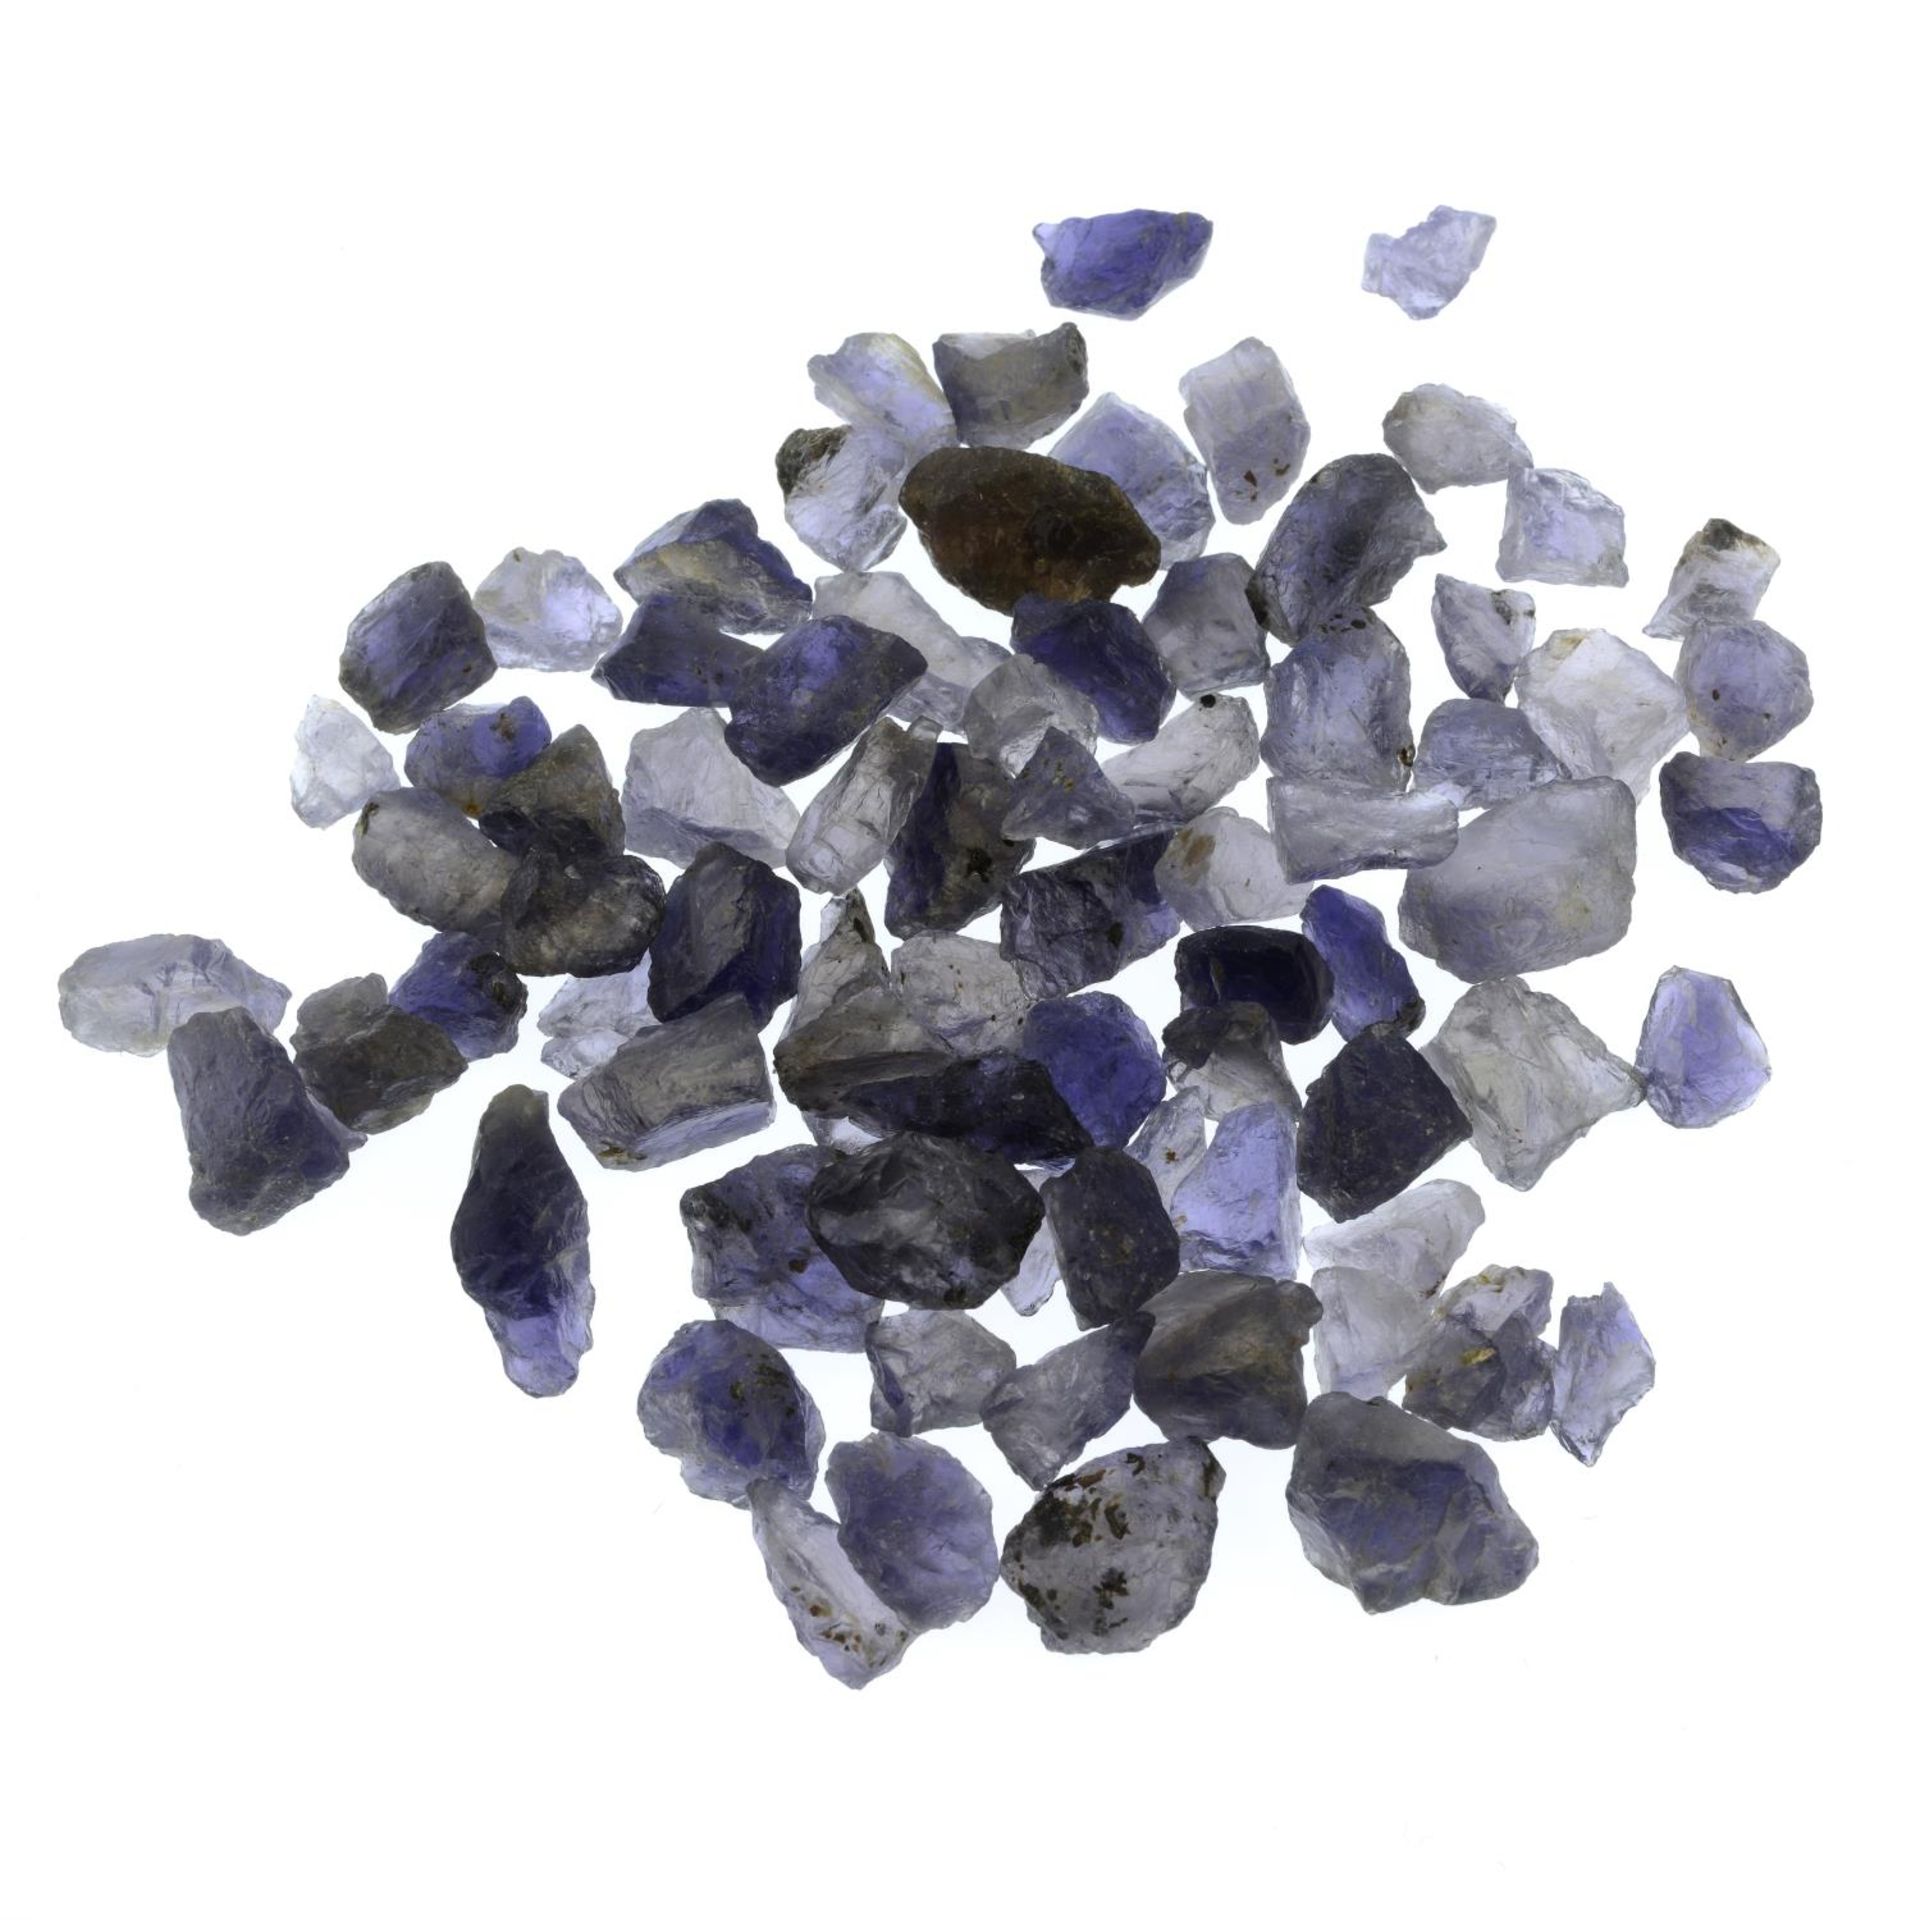 A small selection of rough iolite crystals. - Image 2 of 2